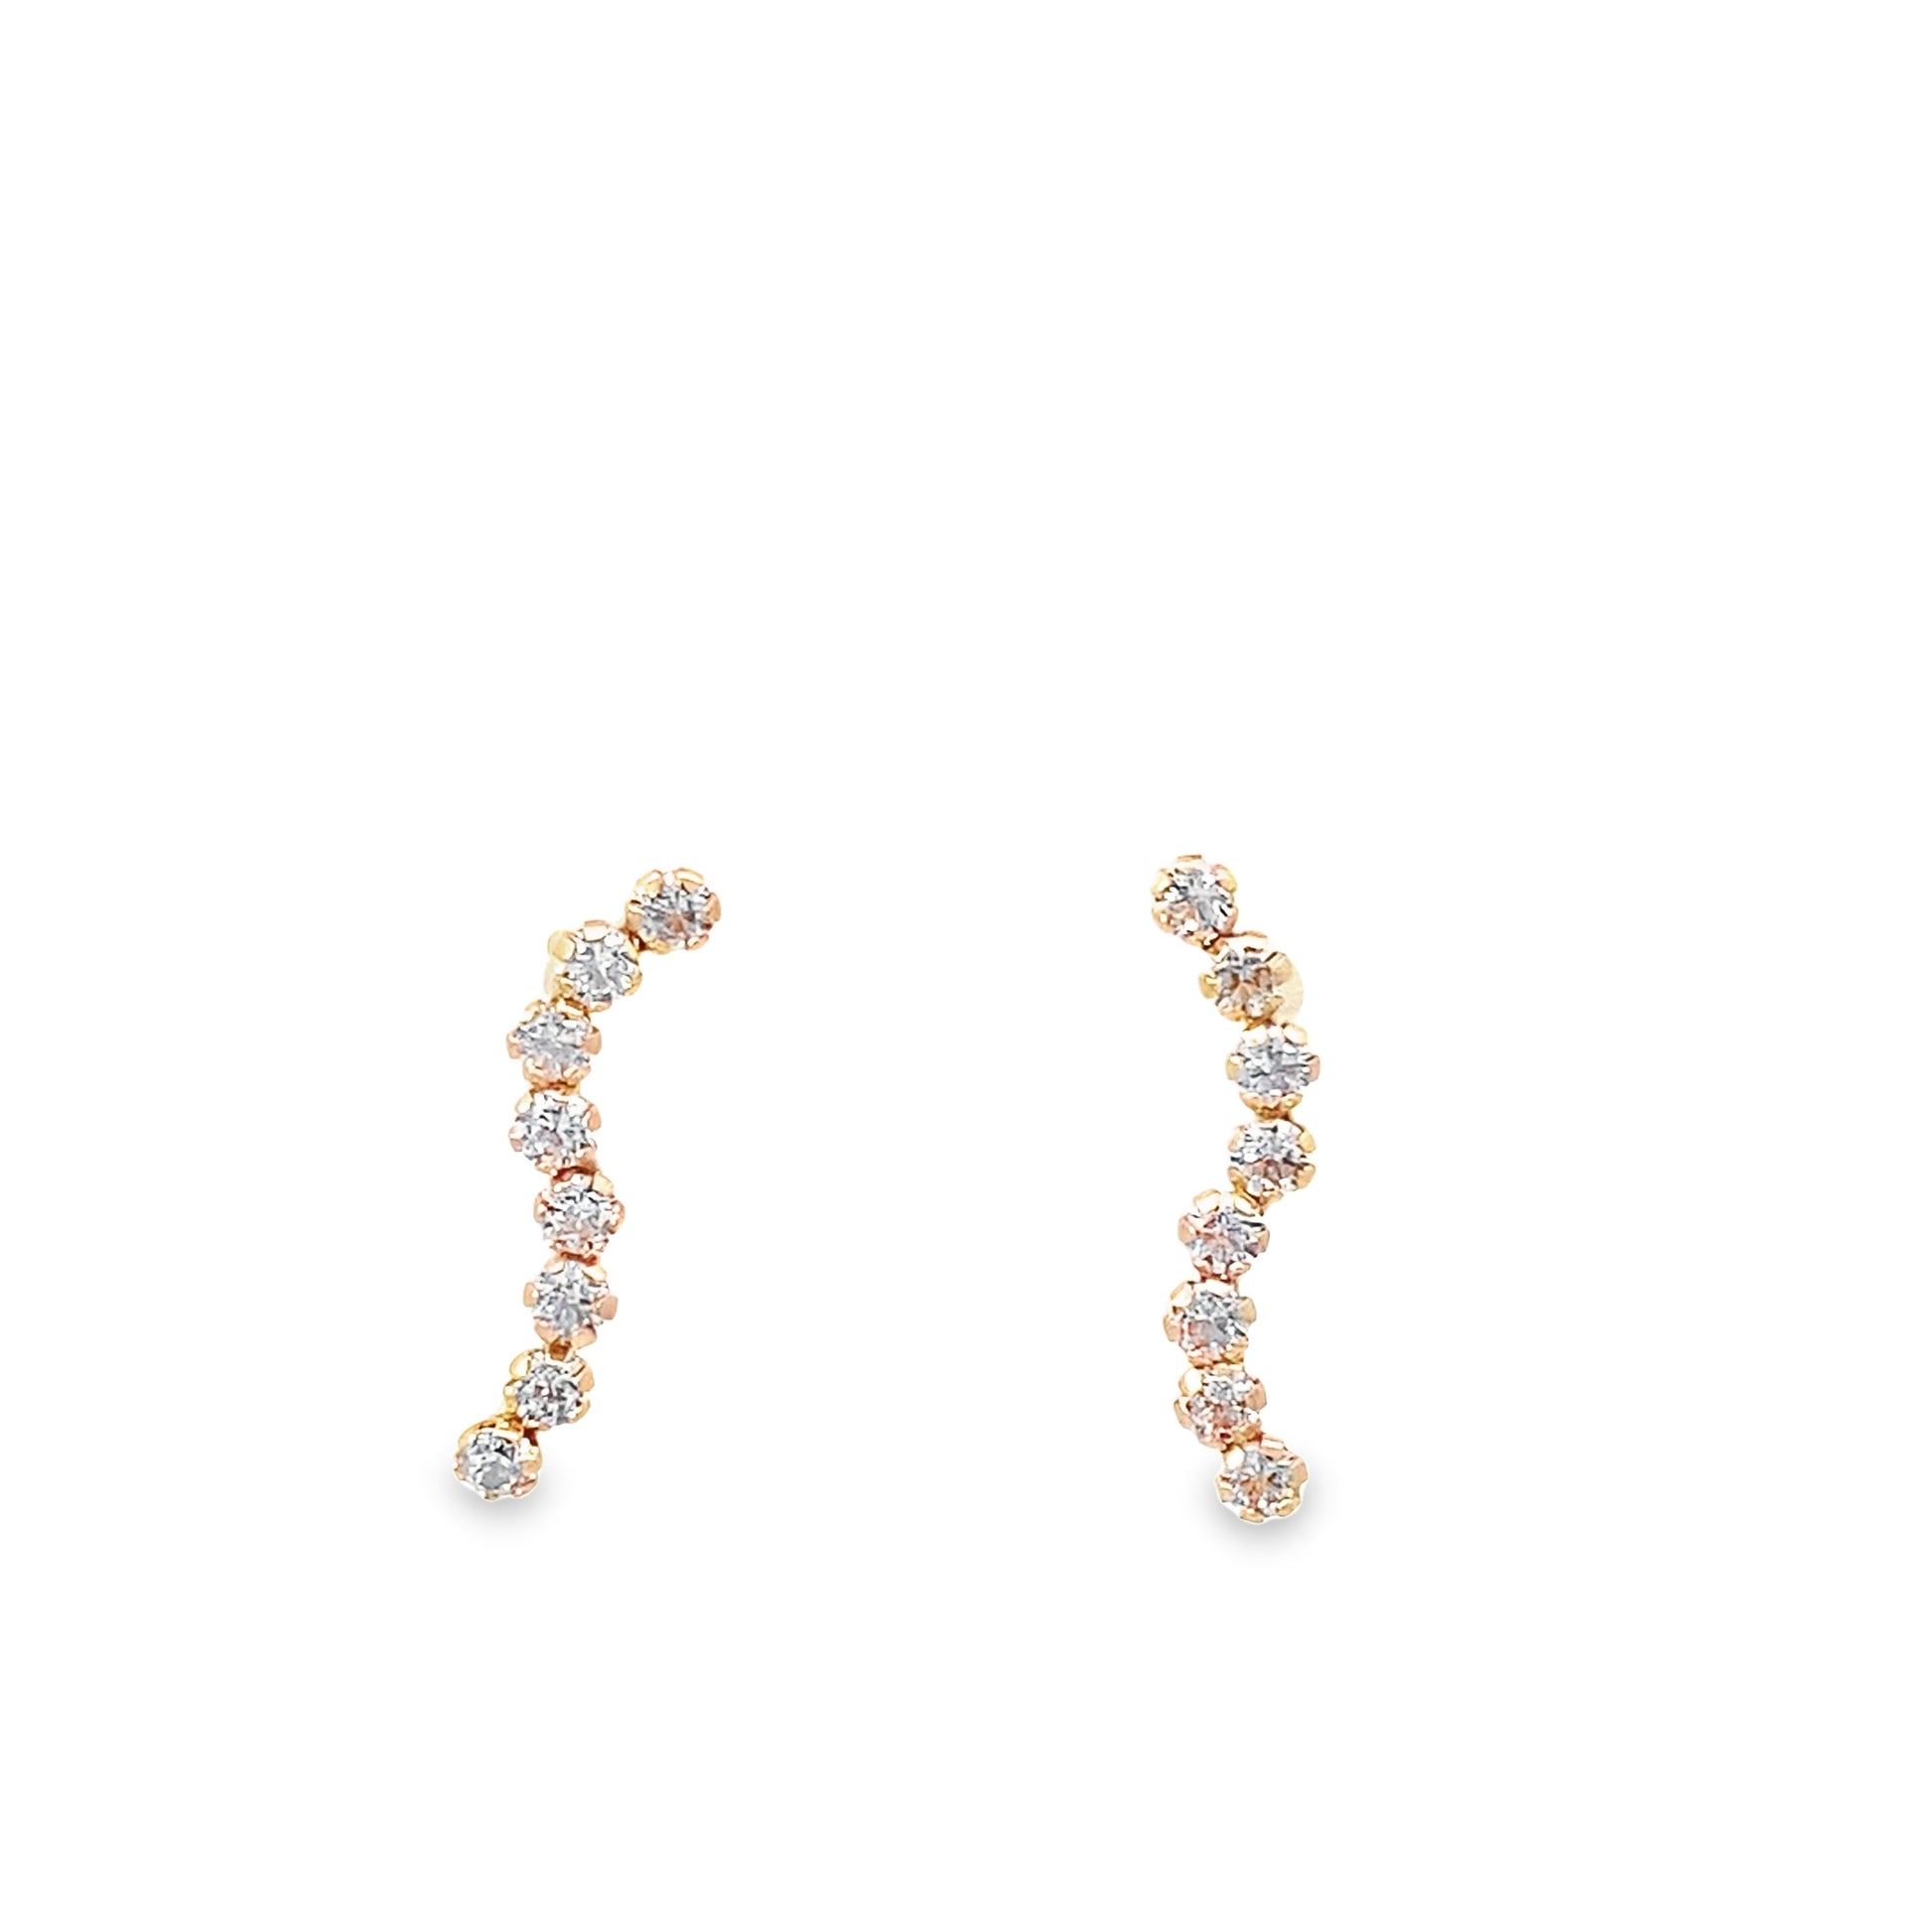 14K Yellow Gold Cz Climber Style Earrings